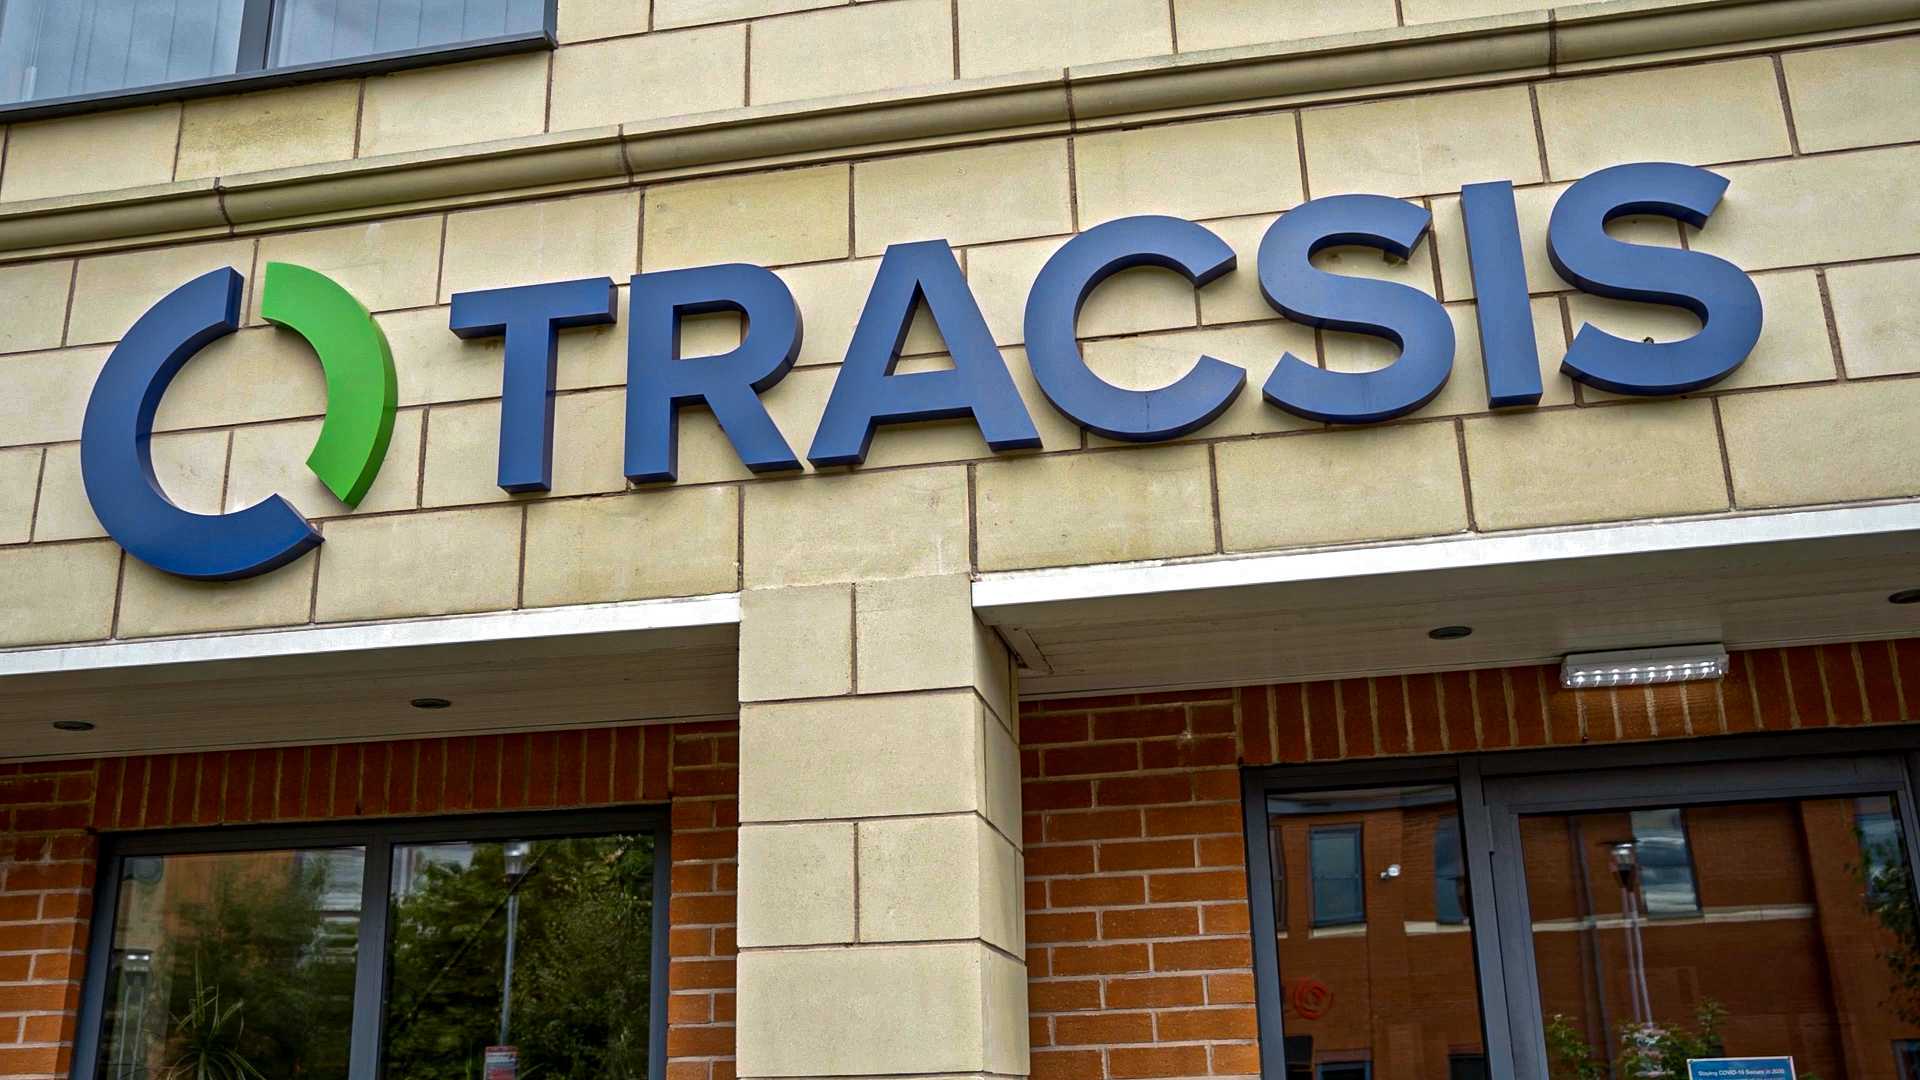 The 'Tracsis' logo on the side of a building.